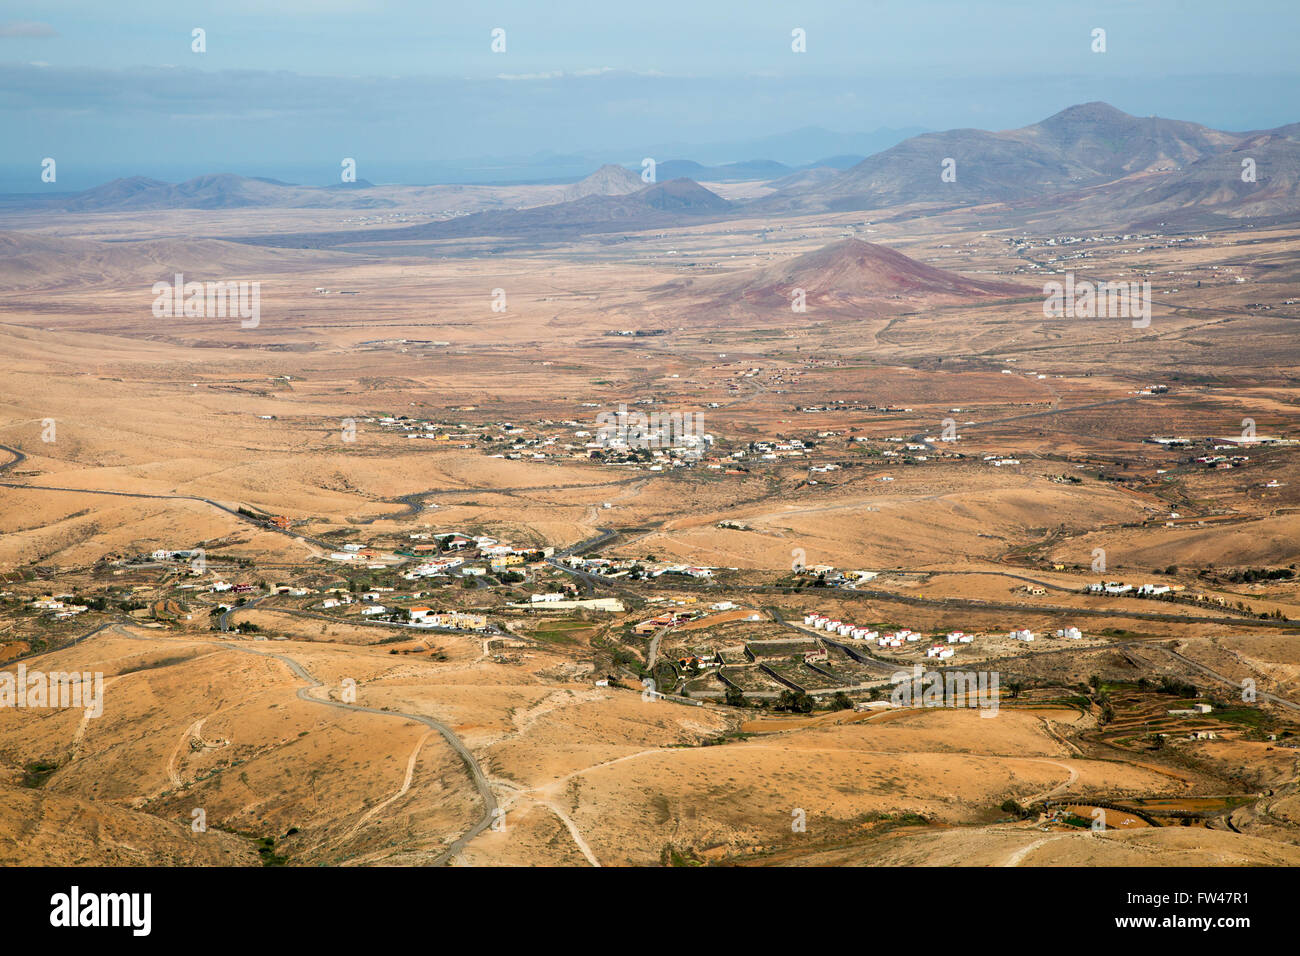 View of land and villages in barren interior of Fuerteventura, Canary Islands, Spain Stock Photo